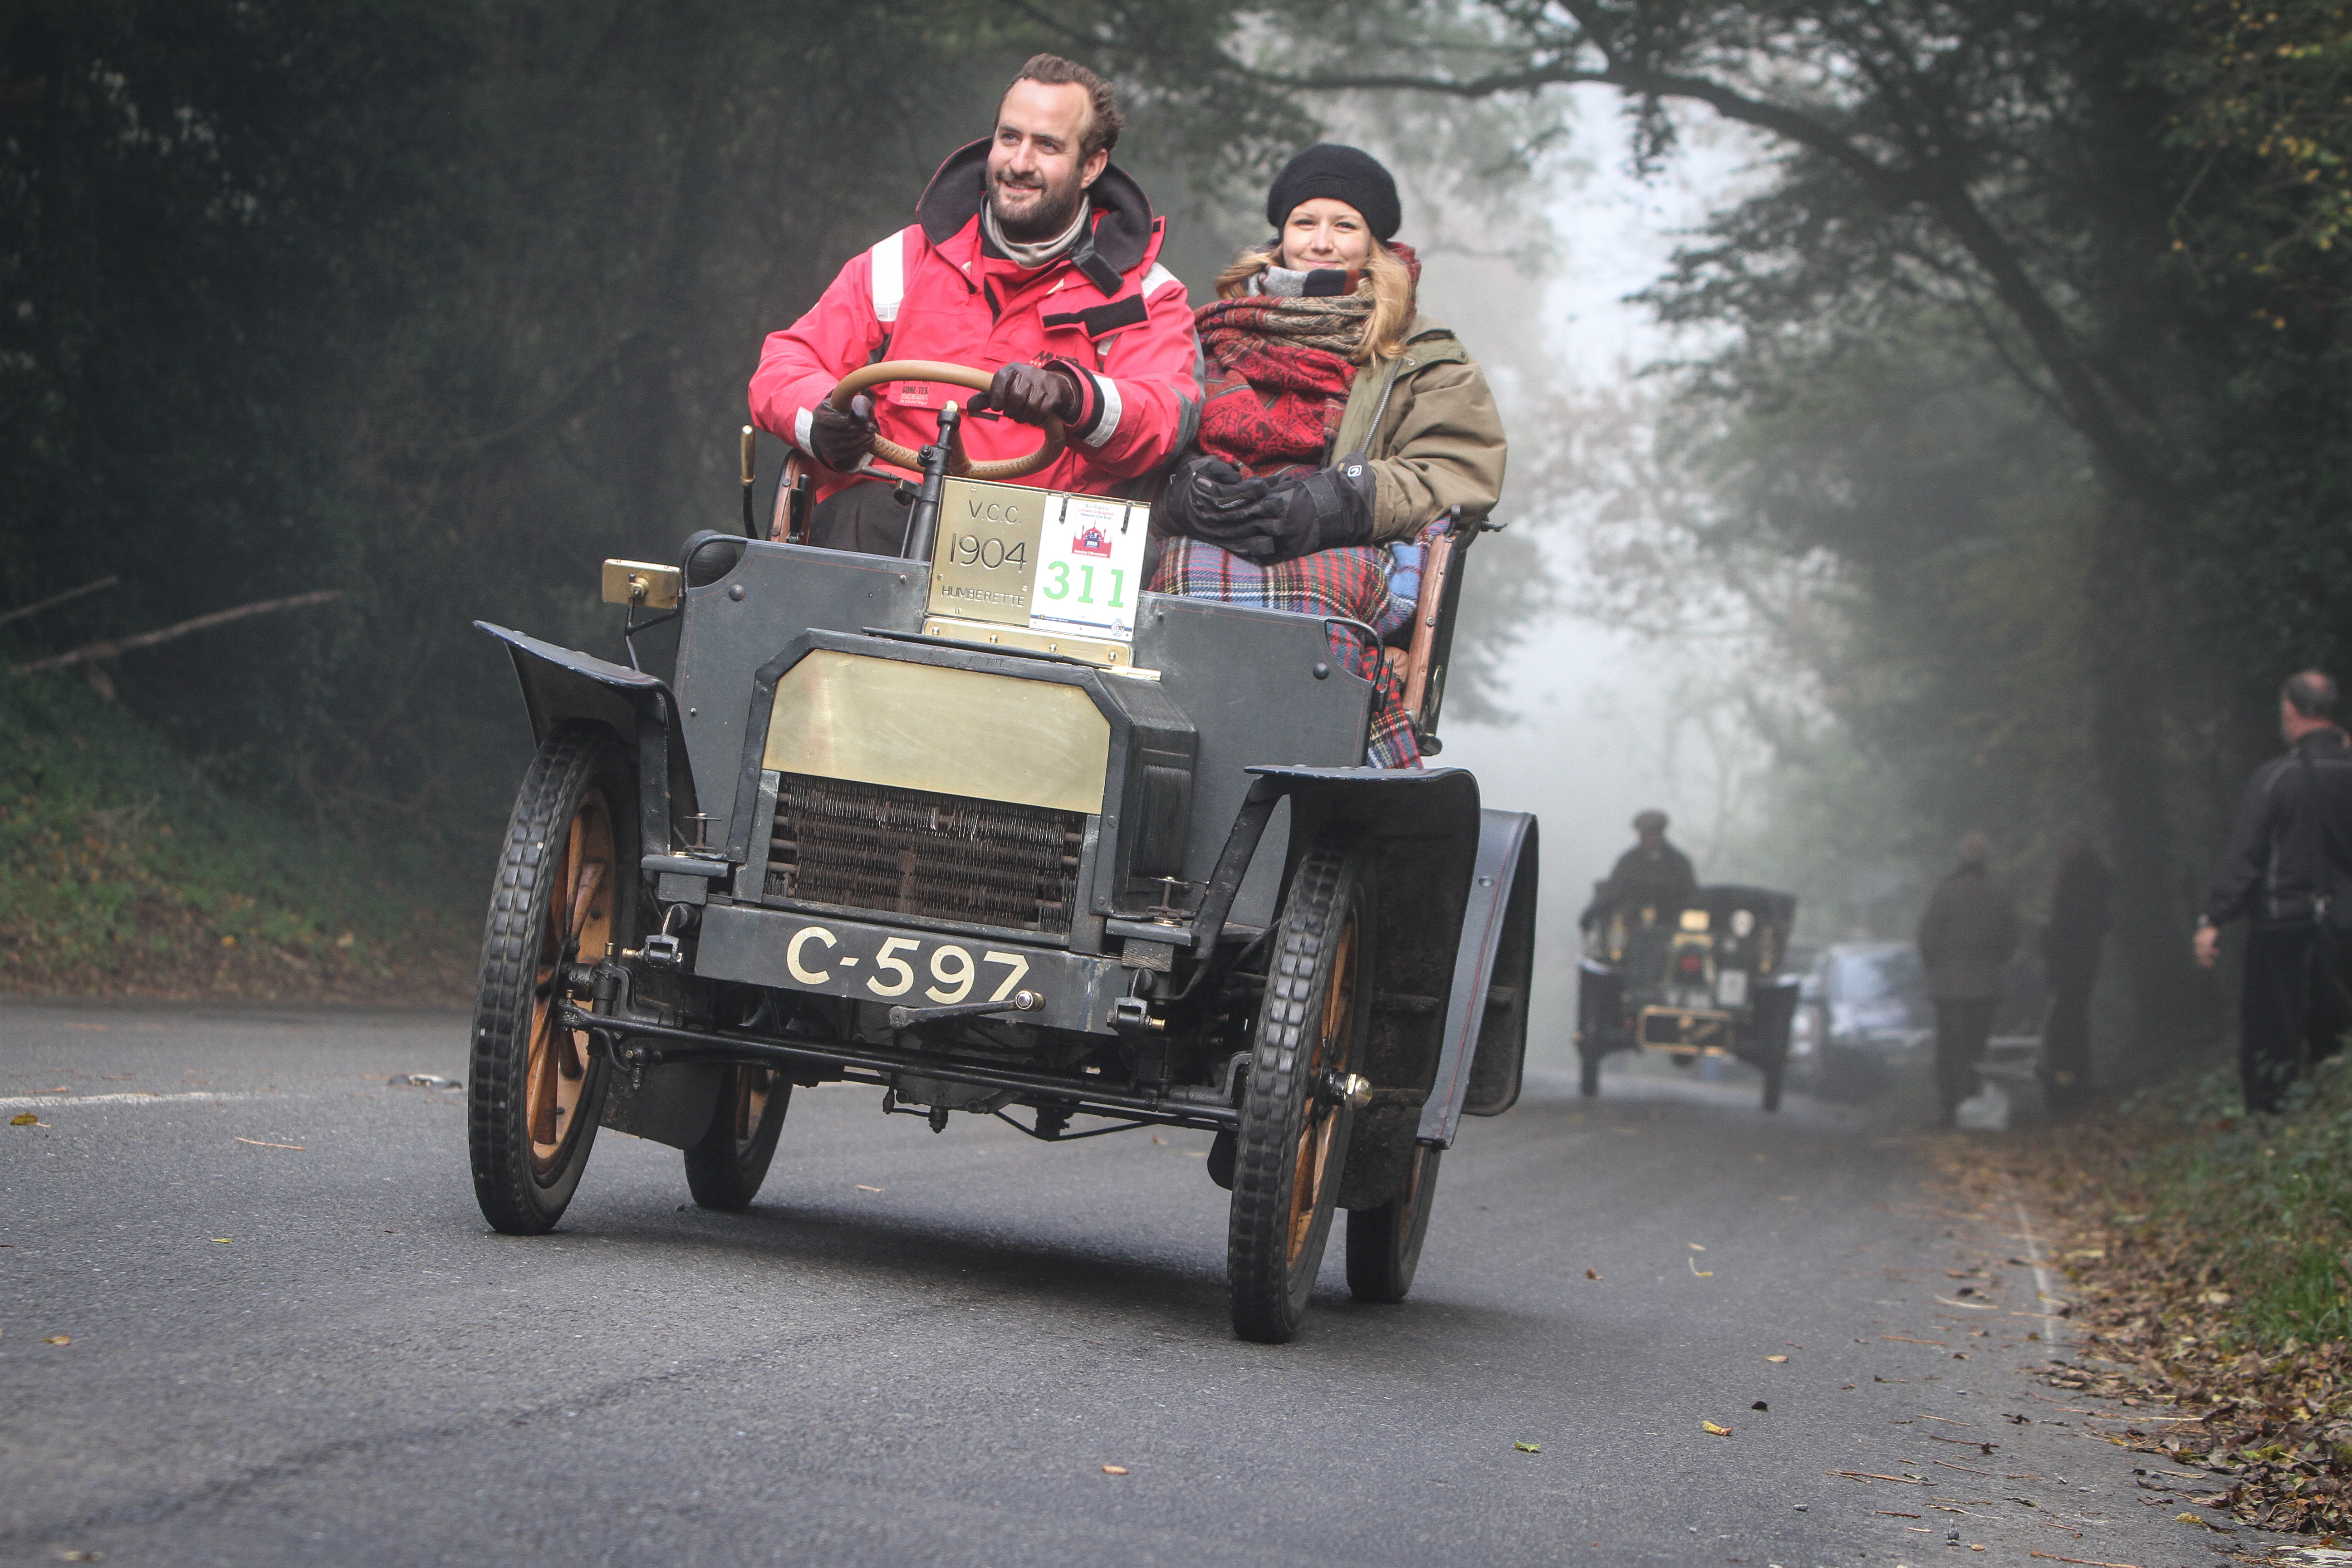 London to Brighton, Time travel: London to Brighton rally celebrates end of 4 mph speed limit, ClassicCars.com Journal